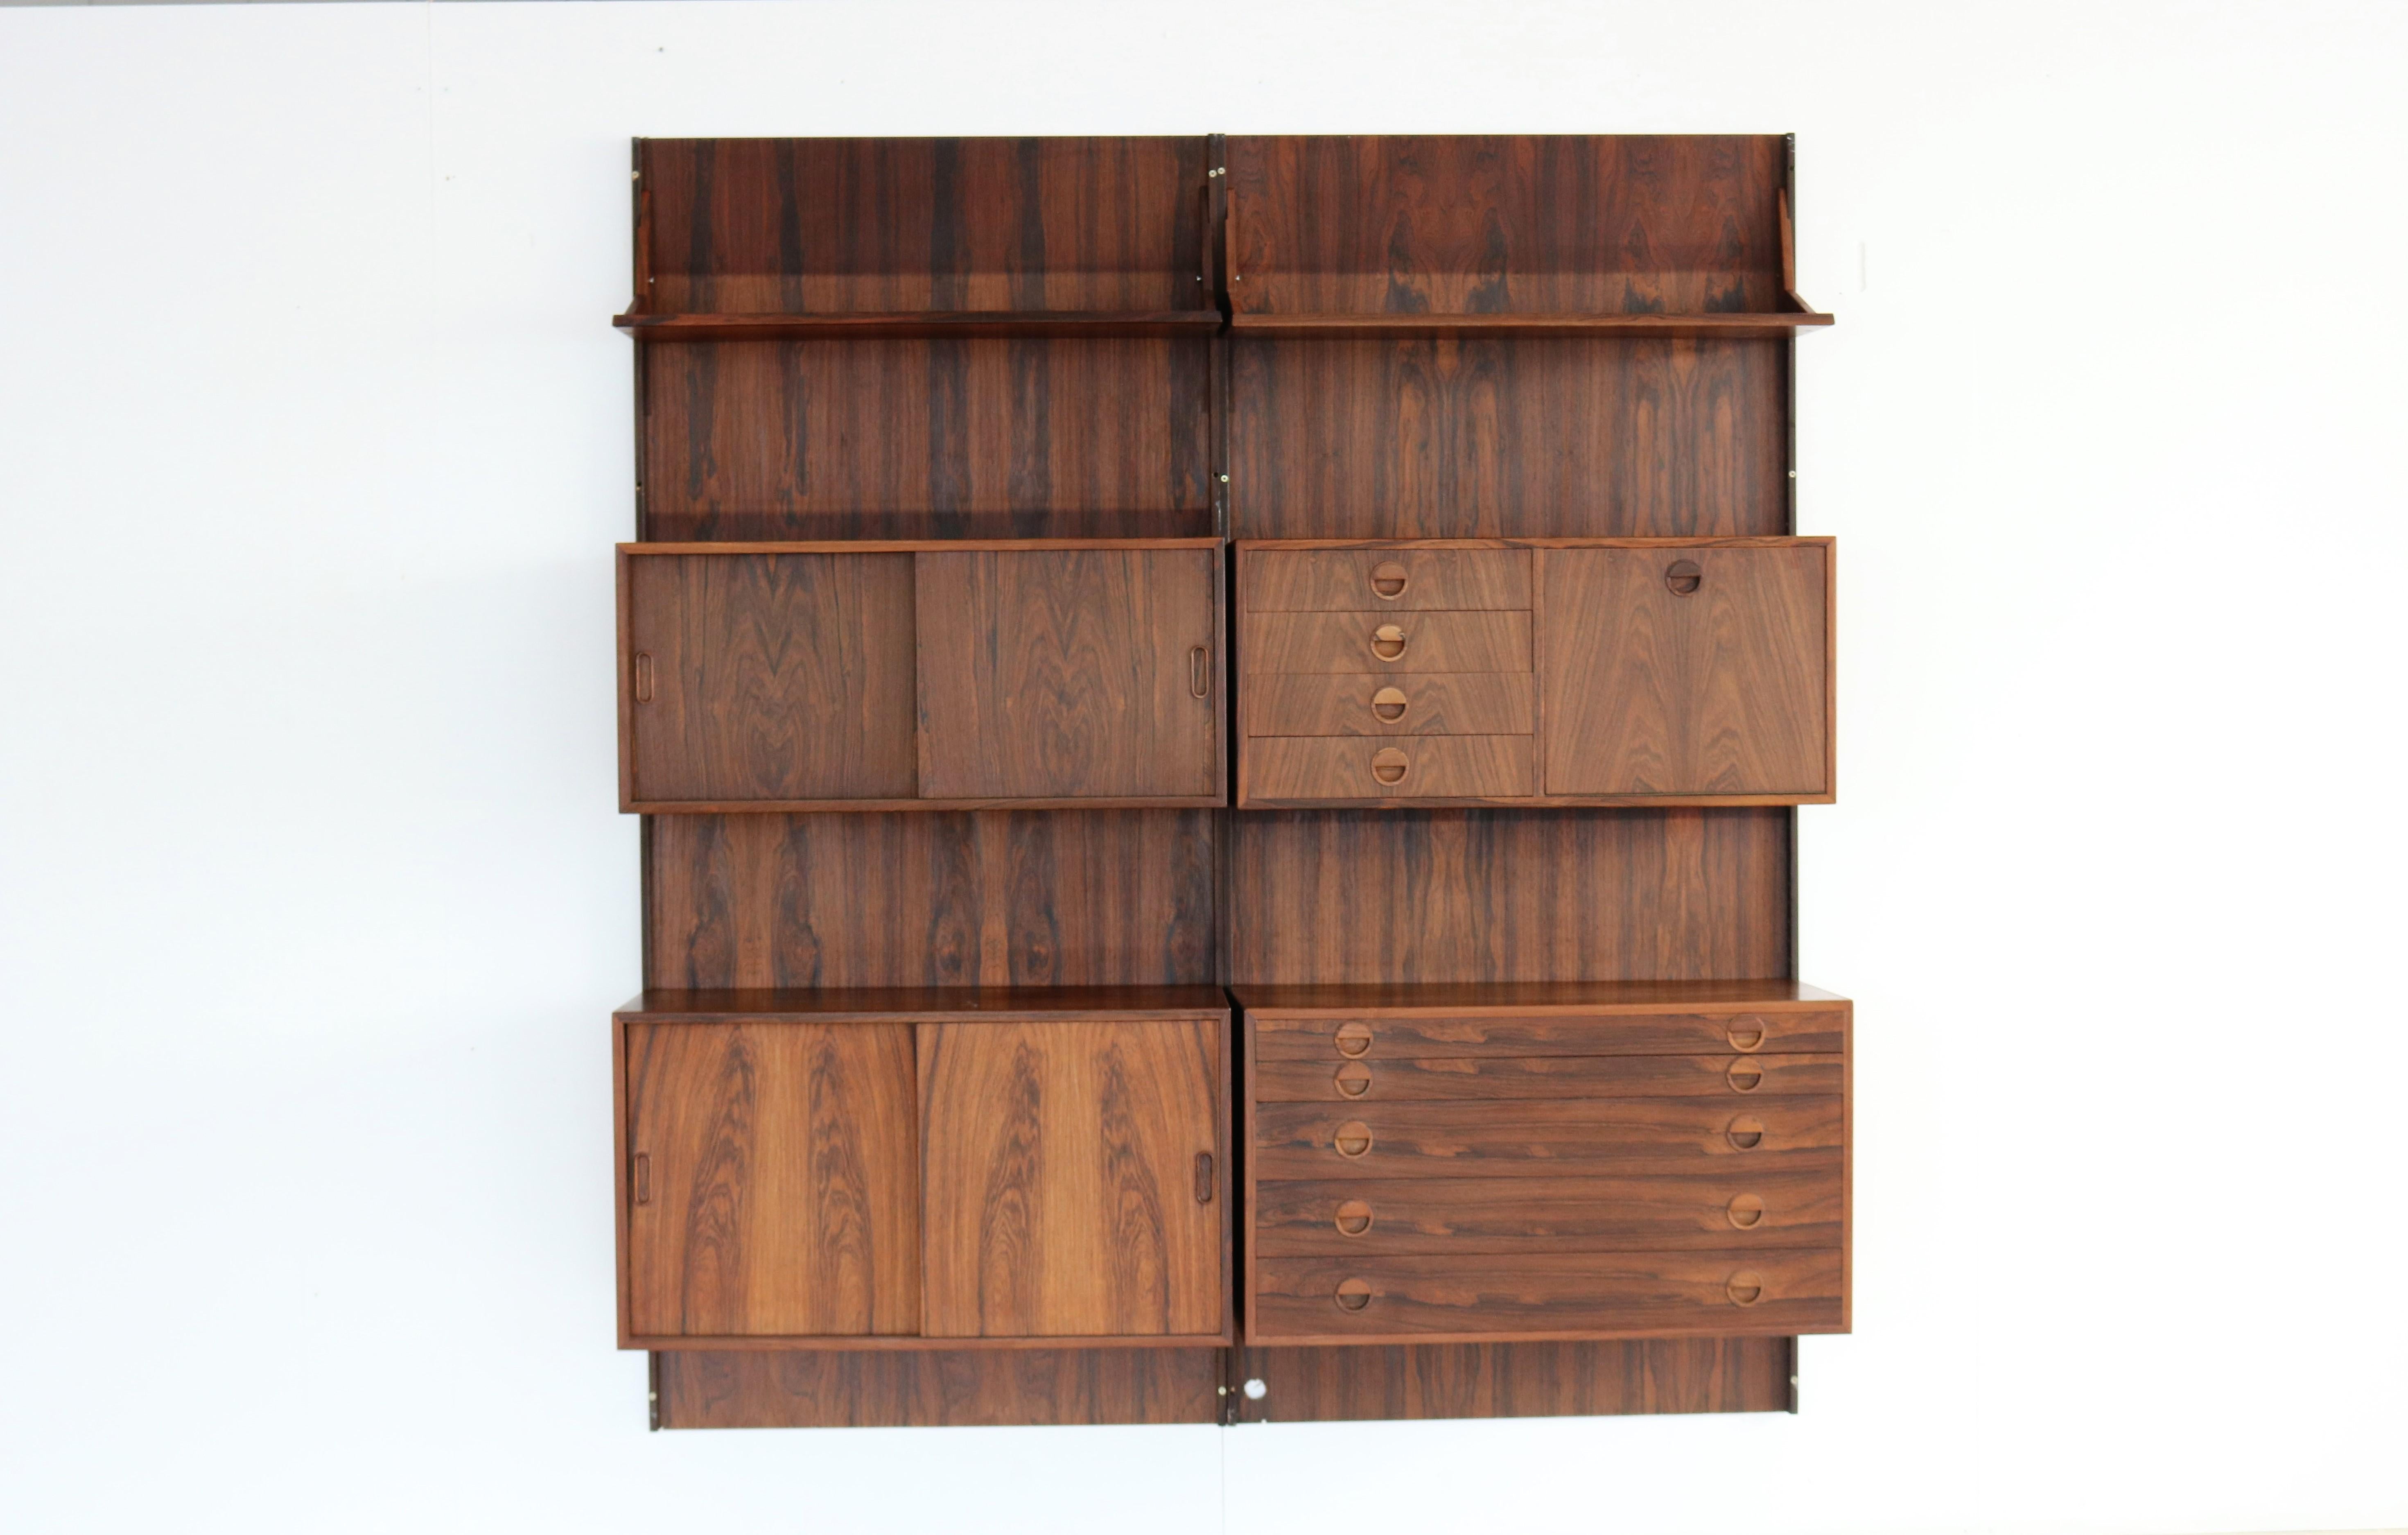 Vintage wall system rosewood HG Furniture Danish.

Rosewood wall system designed by Rud Thygesen & Johnny Sorensen for HG Furniture. The system is of high quality and can be arranged according to your own wishes.

Period 1960s.
Designs Rud